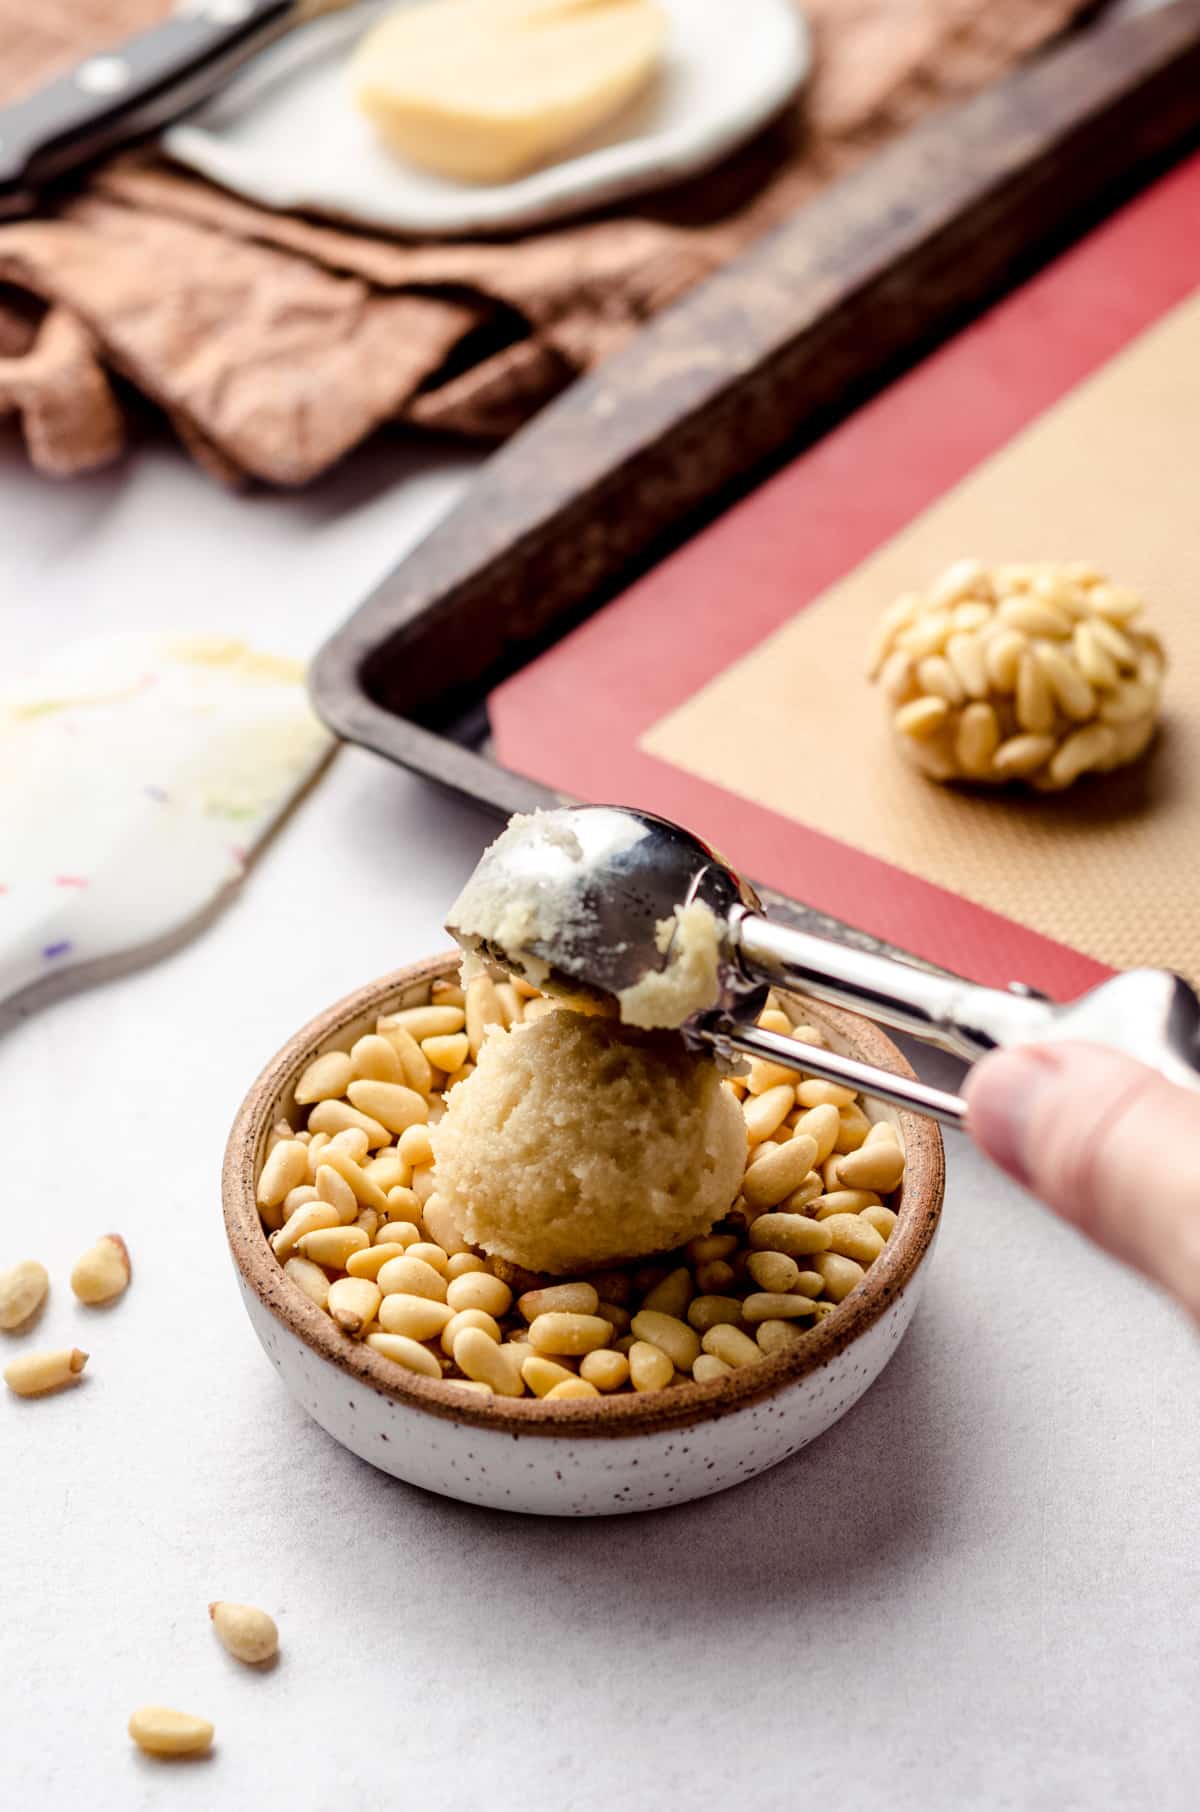 Adding a scoop of cookie dough to a bowl of pine nuts.